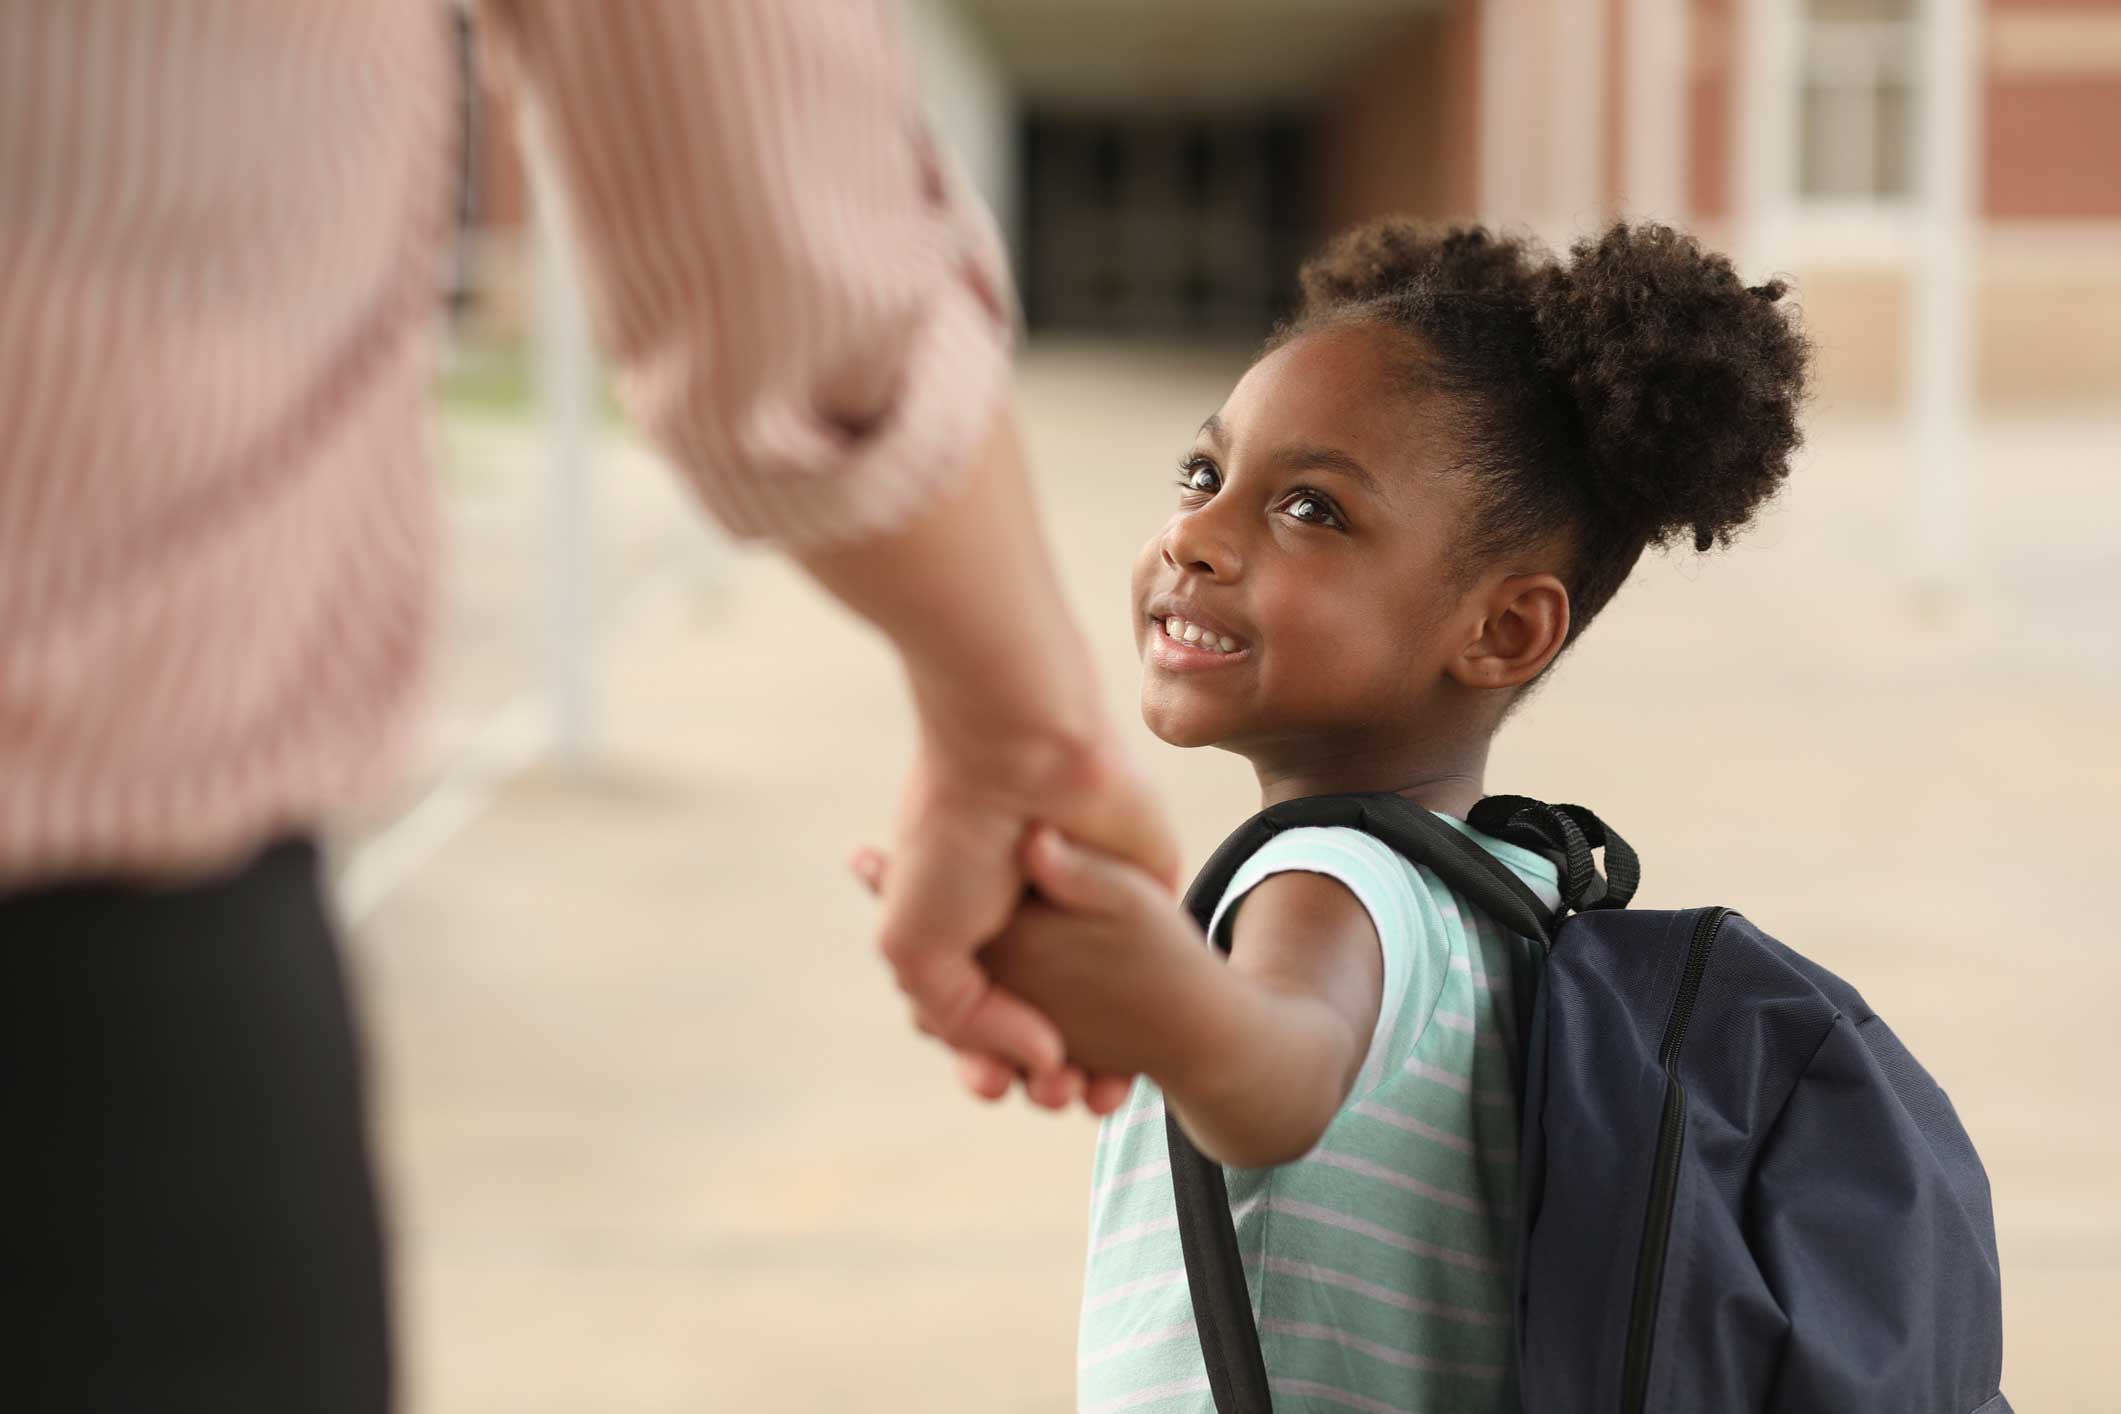 Black child in a backpack holding white parent's hand and smiling